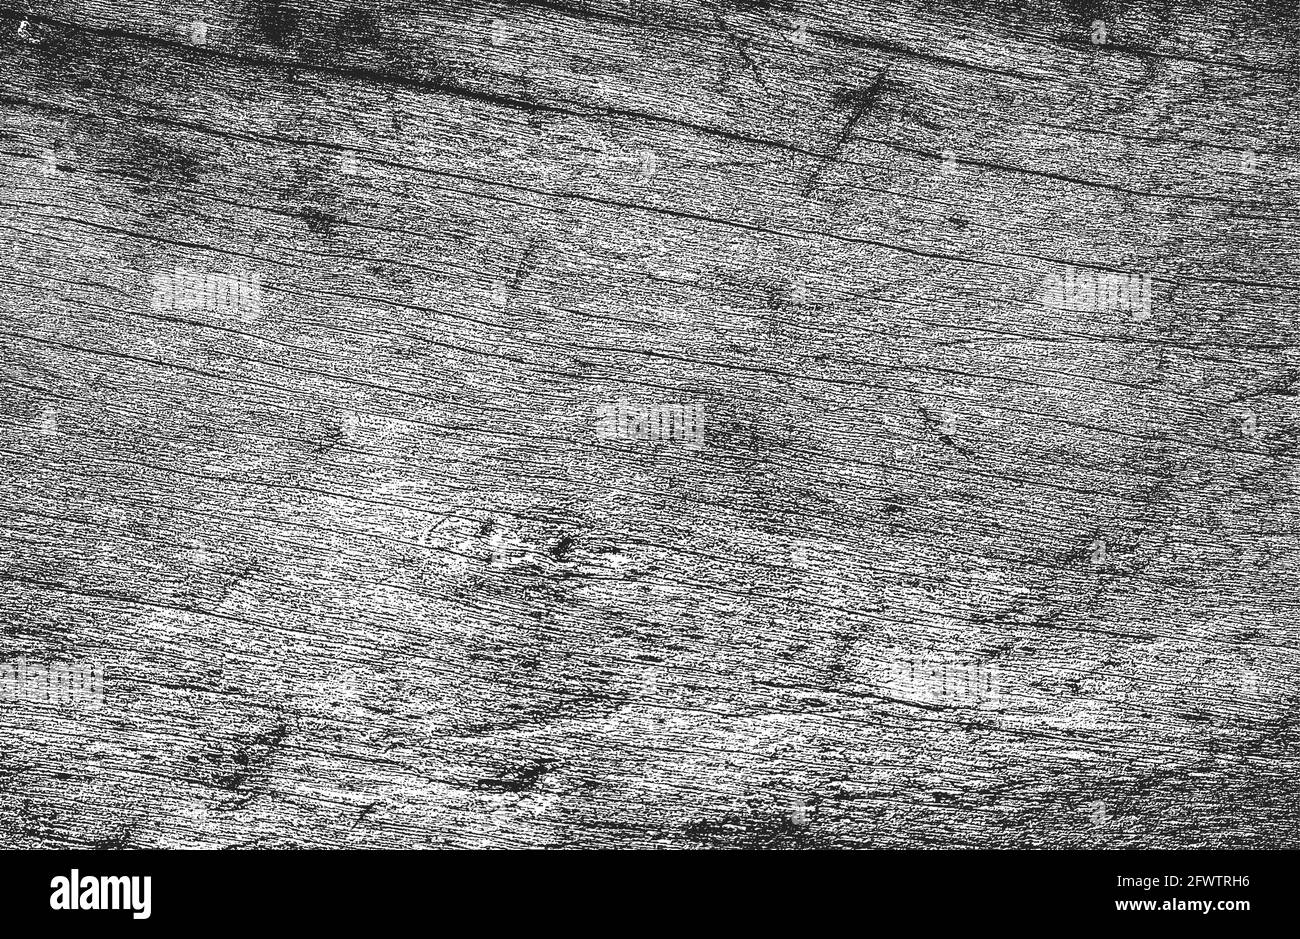 Distressed overlay wooden plank texture, grunge background. abstract halftone vector illustration Stock Vector